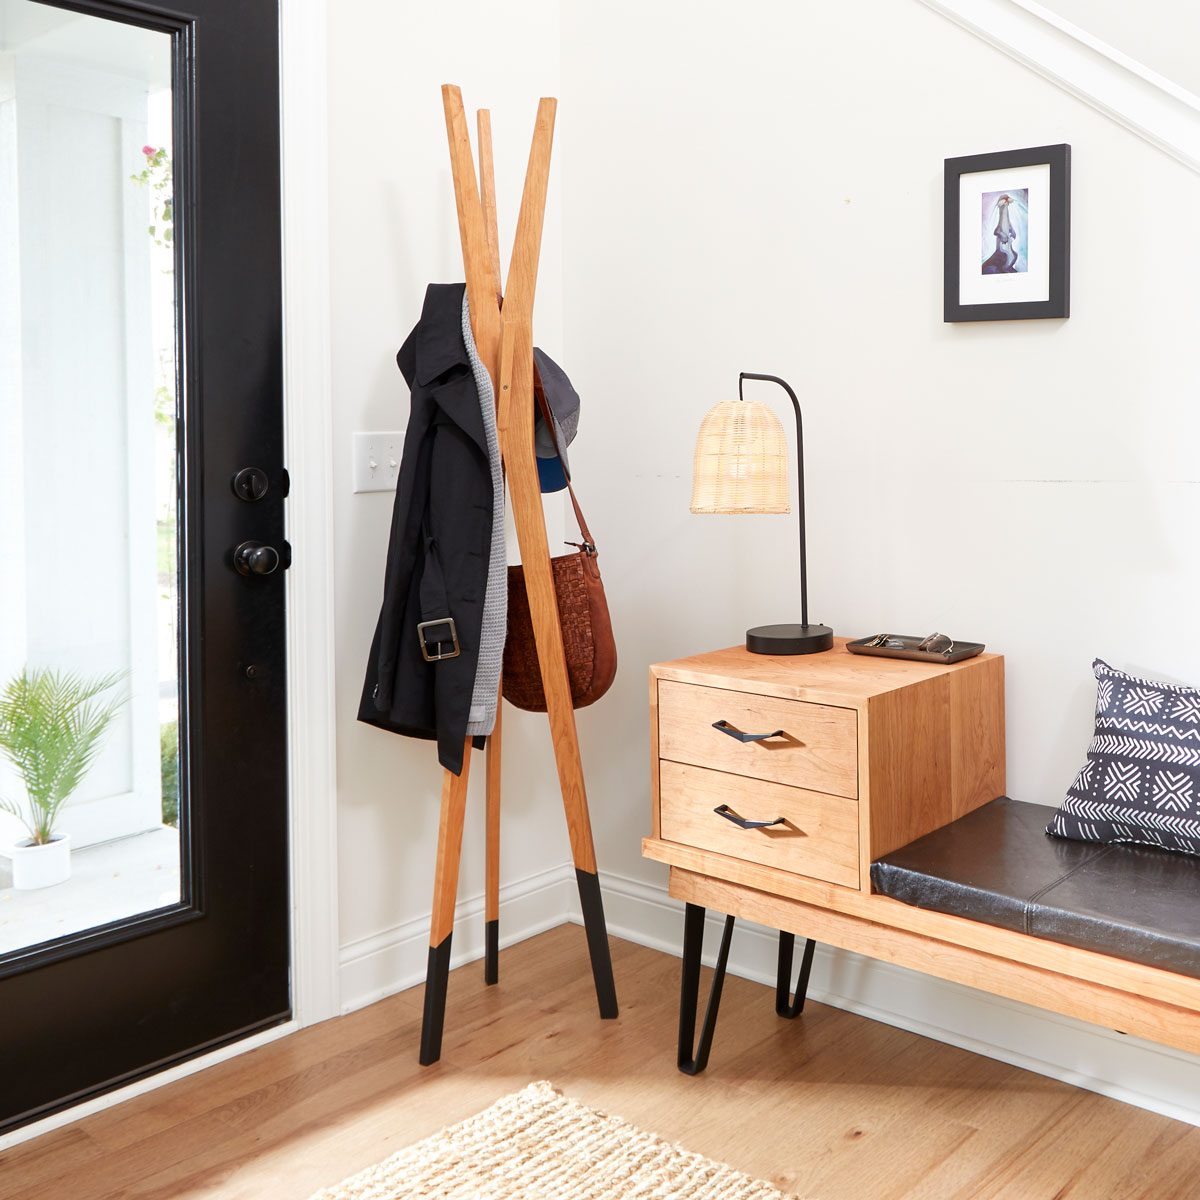 How to Build a Mid-Century Modern Coat Rack